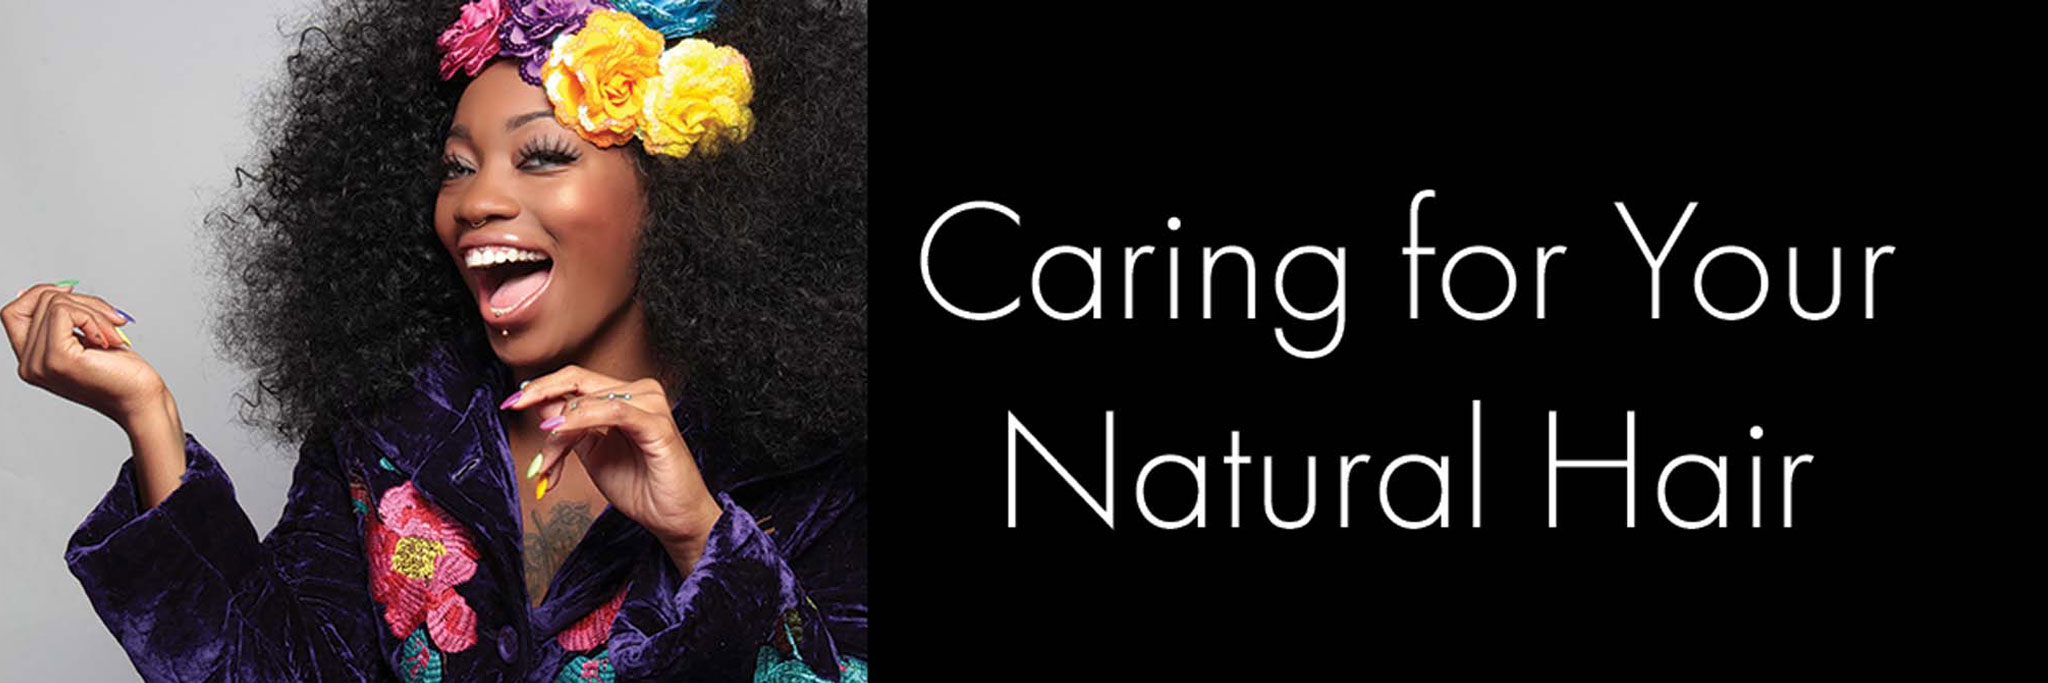 caring for your natural hair